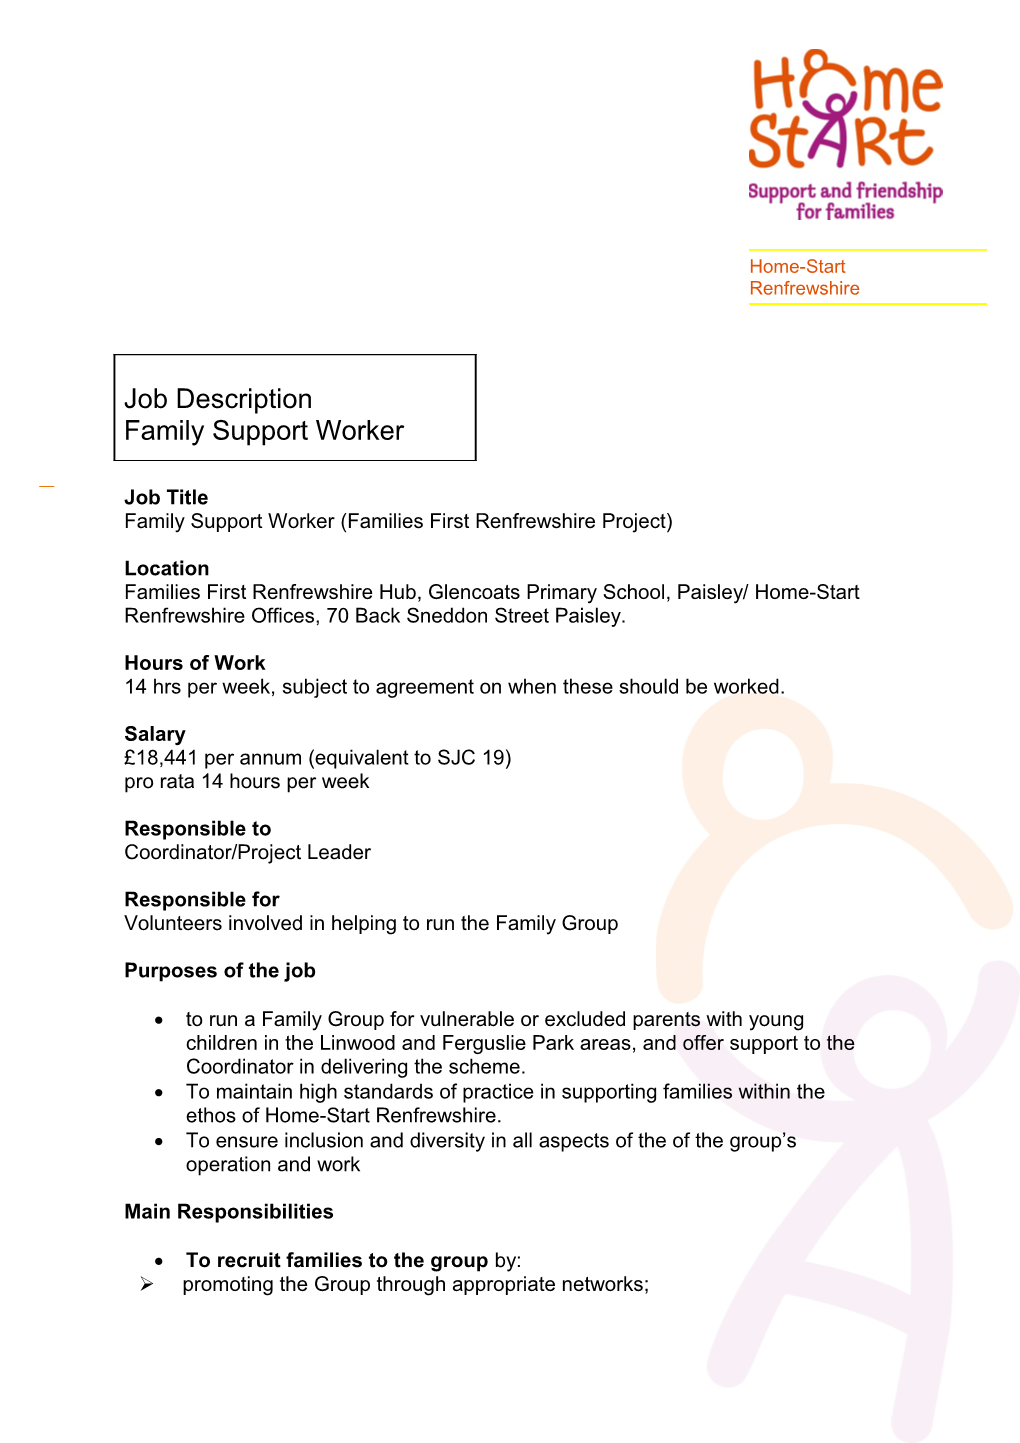 Family Support Worker (Families First Renfrewshire Project)